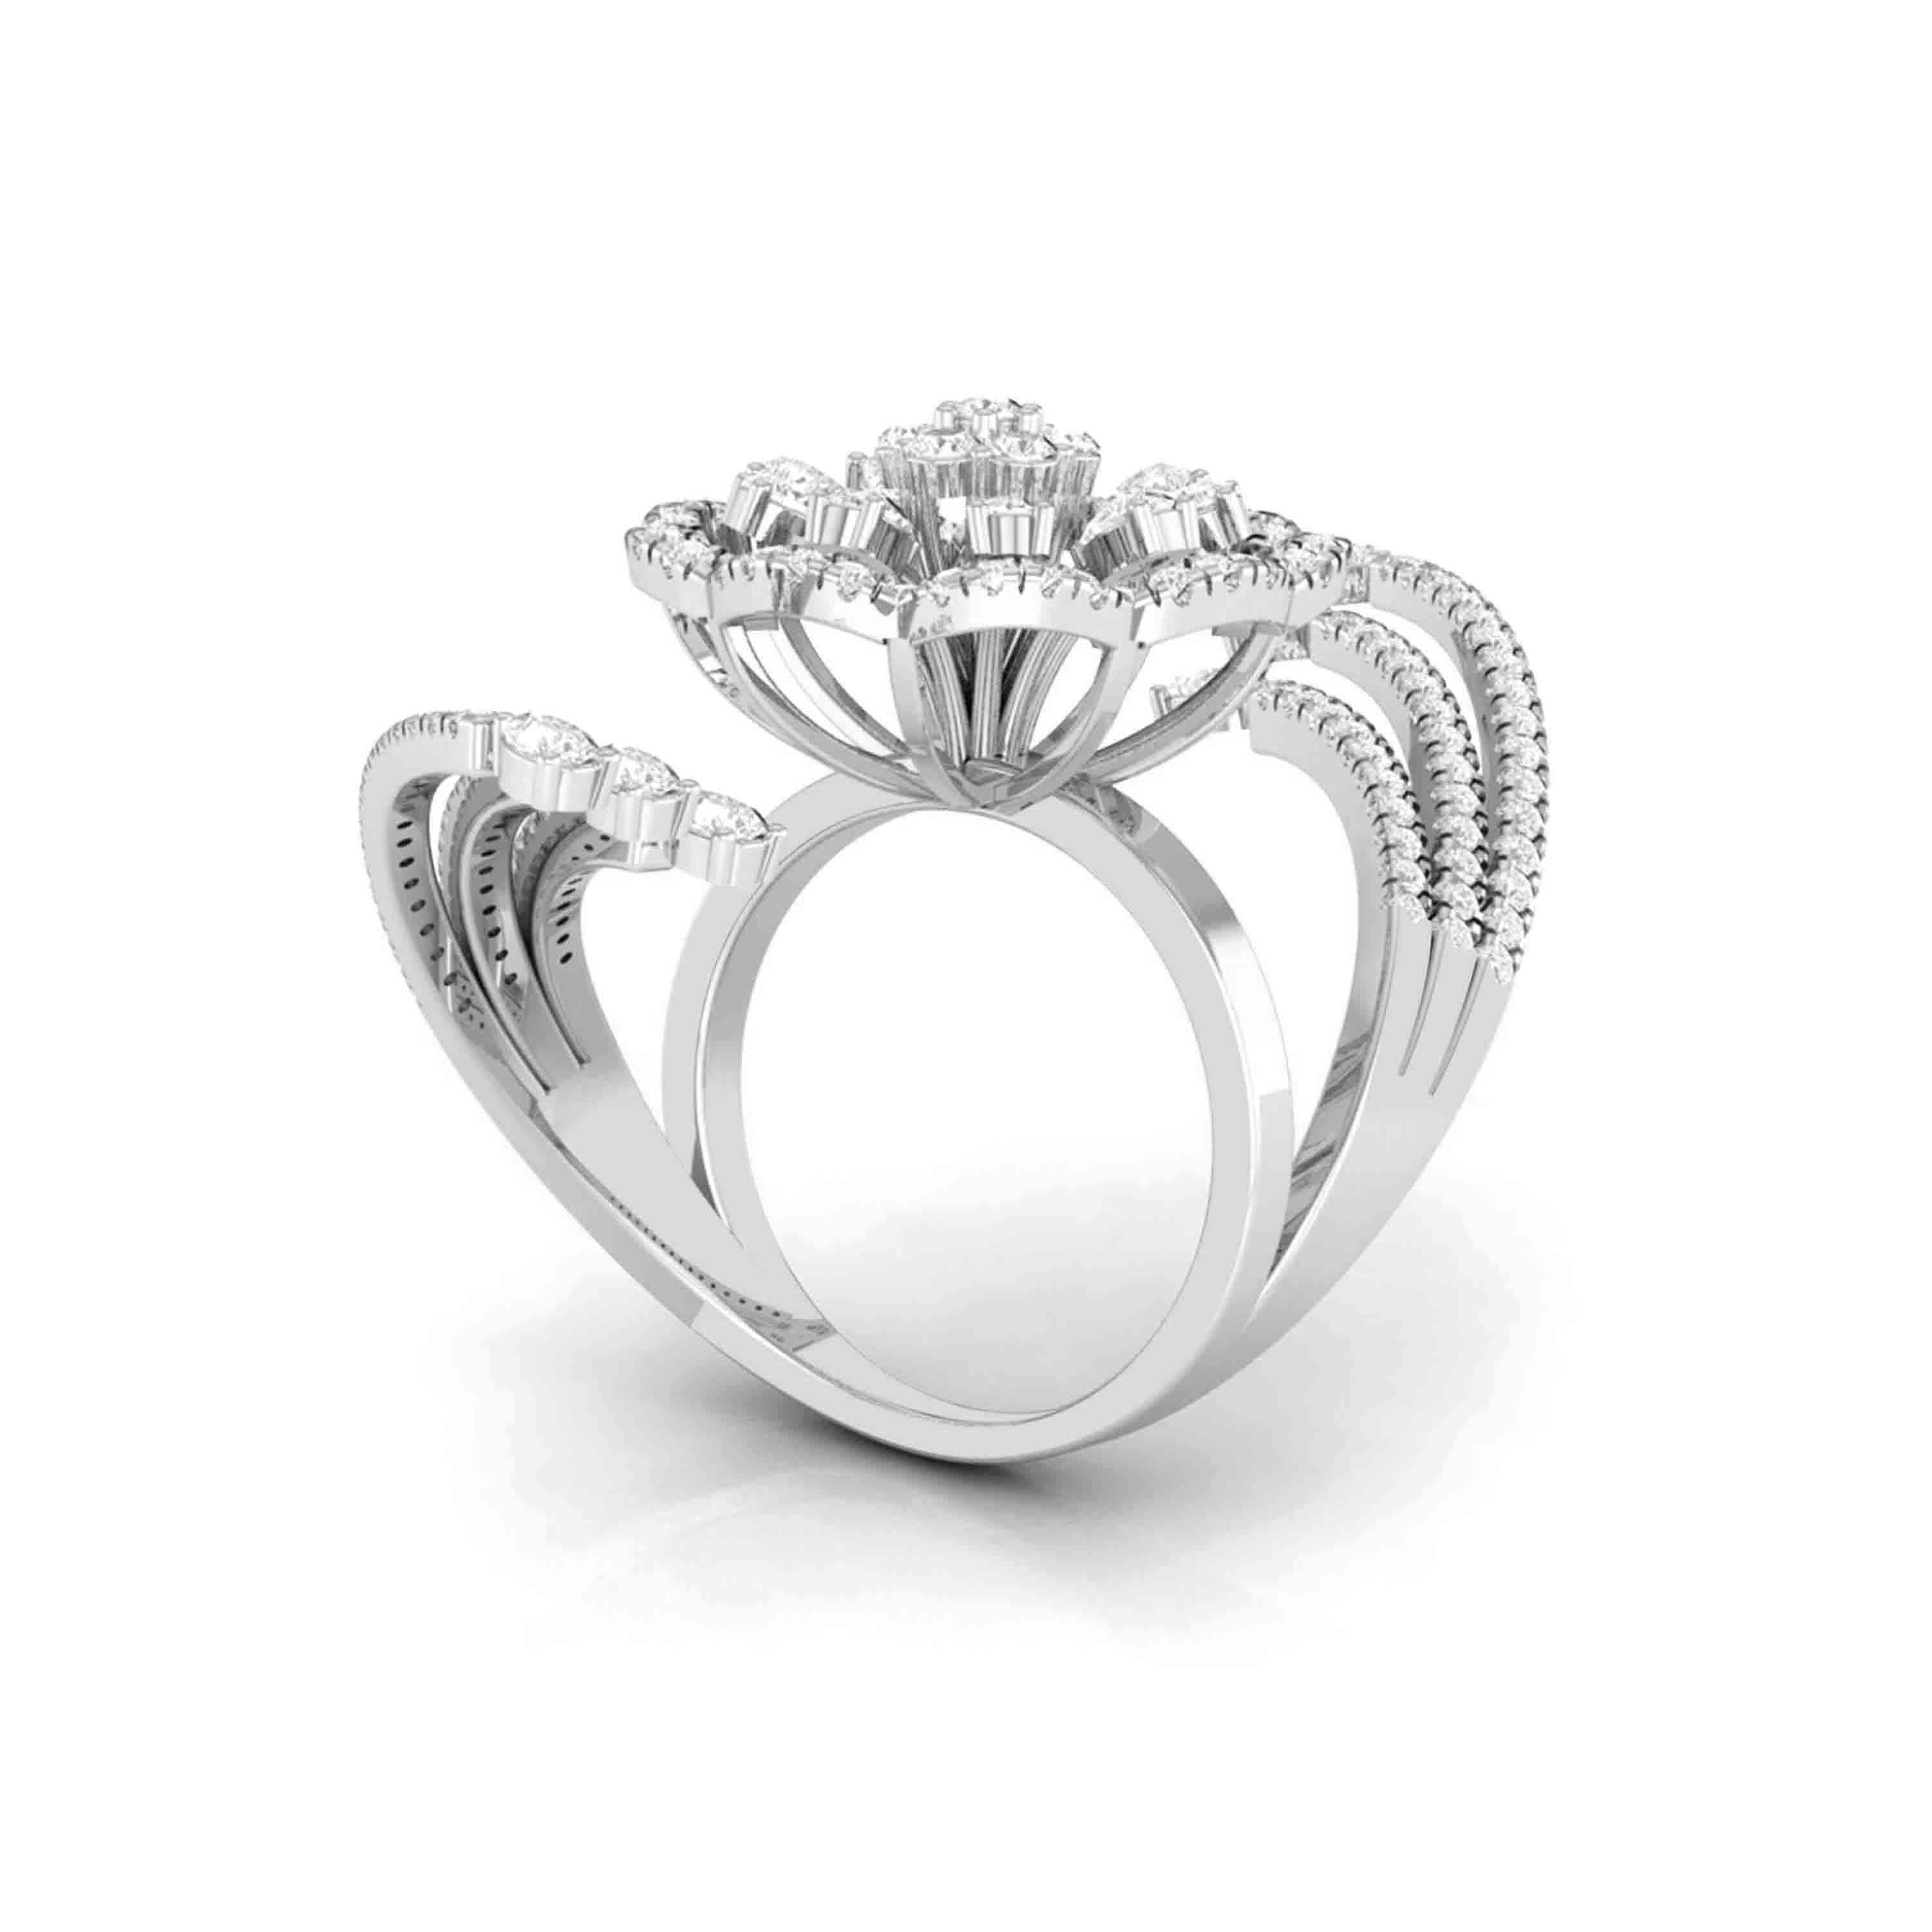 Diamond Cocktail Ring | Diamond cocktail rings, Cocktail rings, Latest ring  designs